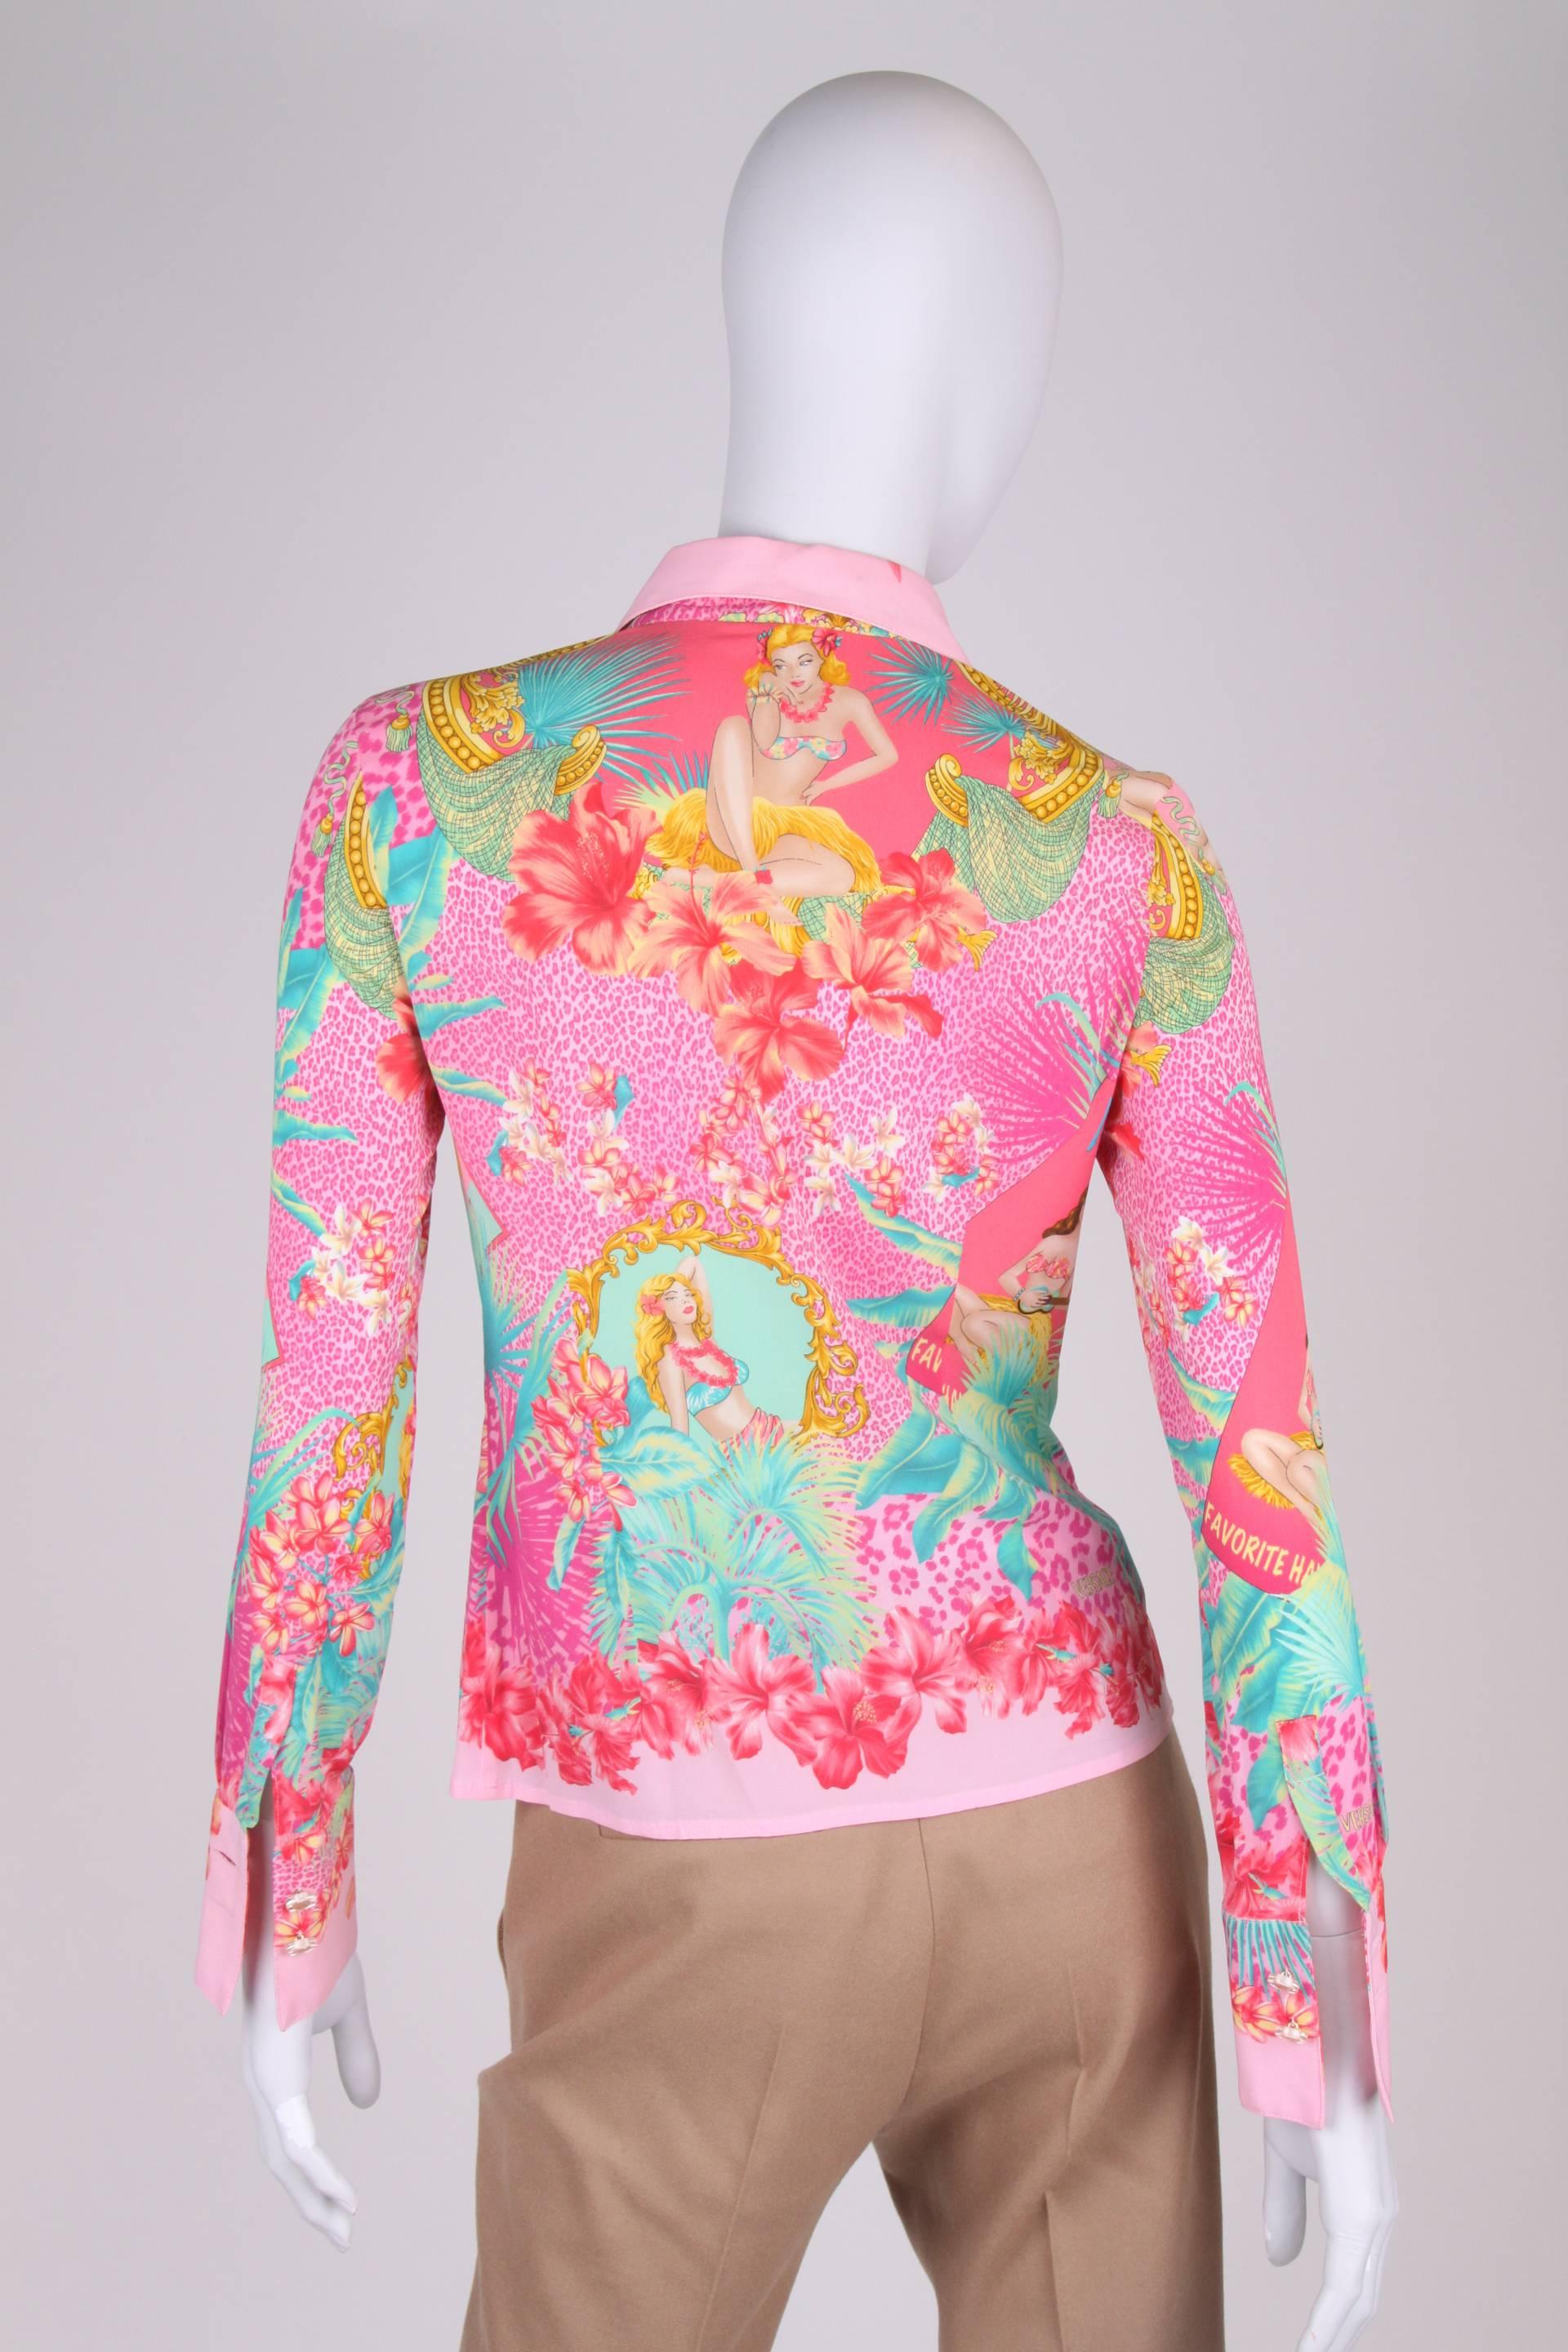 olourful blouse by Versace embellished with a Hawai print.

This cheerful print is executed in different shades of pink, green and yellow. A normal size collar, long sleeves with cuffs and gold-tone buttons with a Medusa head.

Some spandex is added